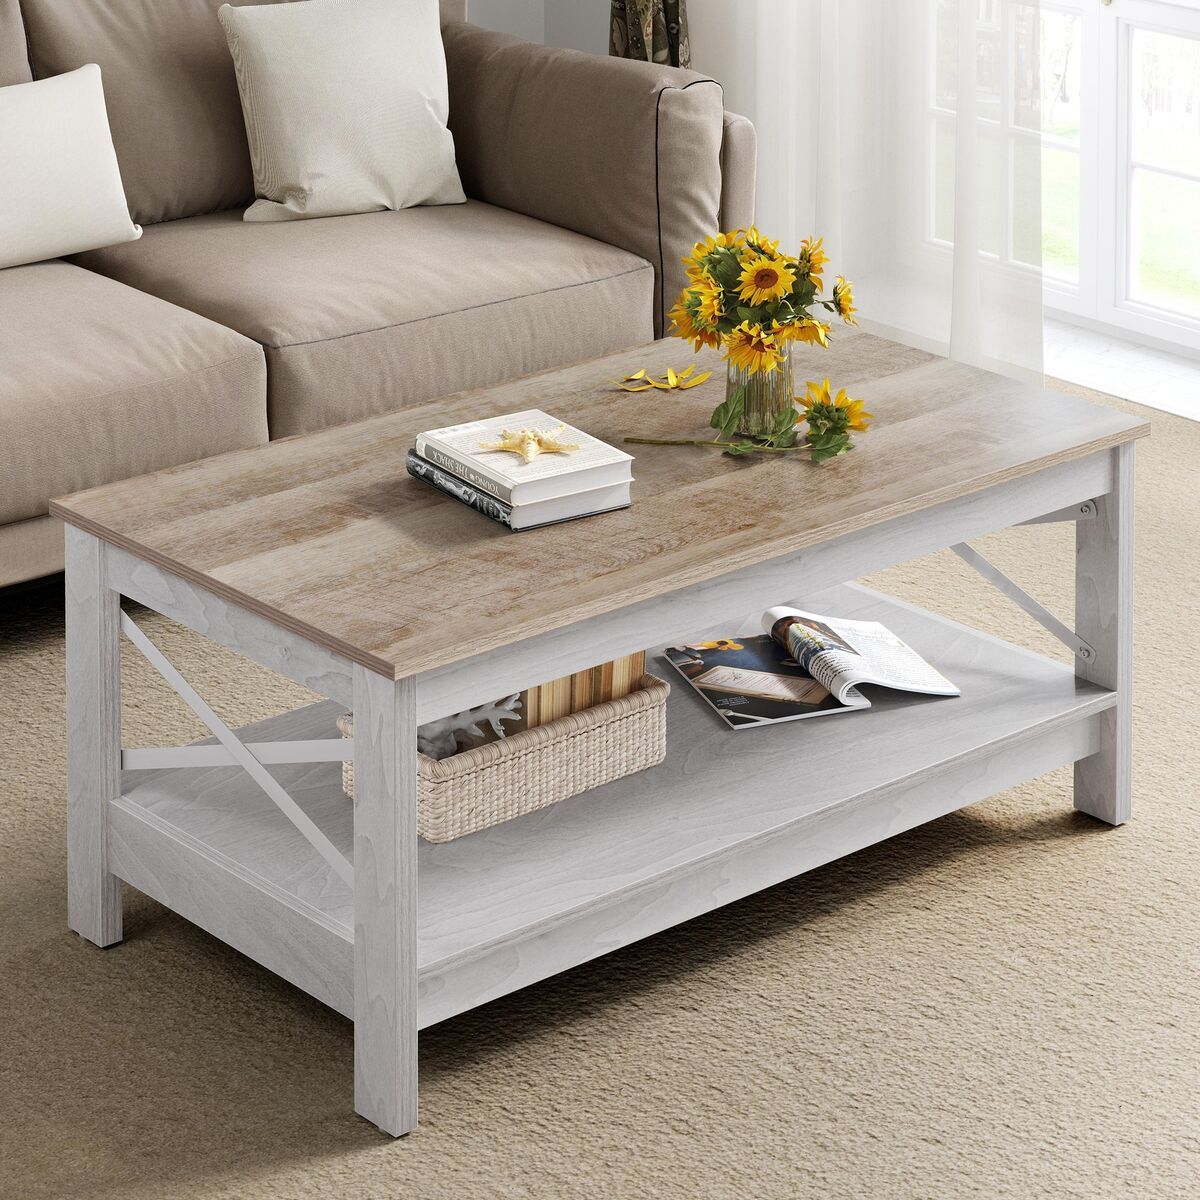 Farmhouse Coffee Table With Storage 2 Tier Center Cocktail Table Living Room  | Ebay With Living Room Farmhouse Coffee Tables (View 14 of 15)